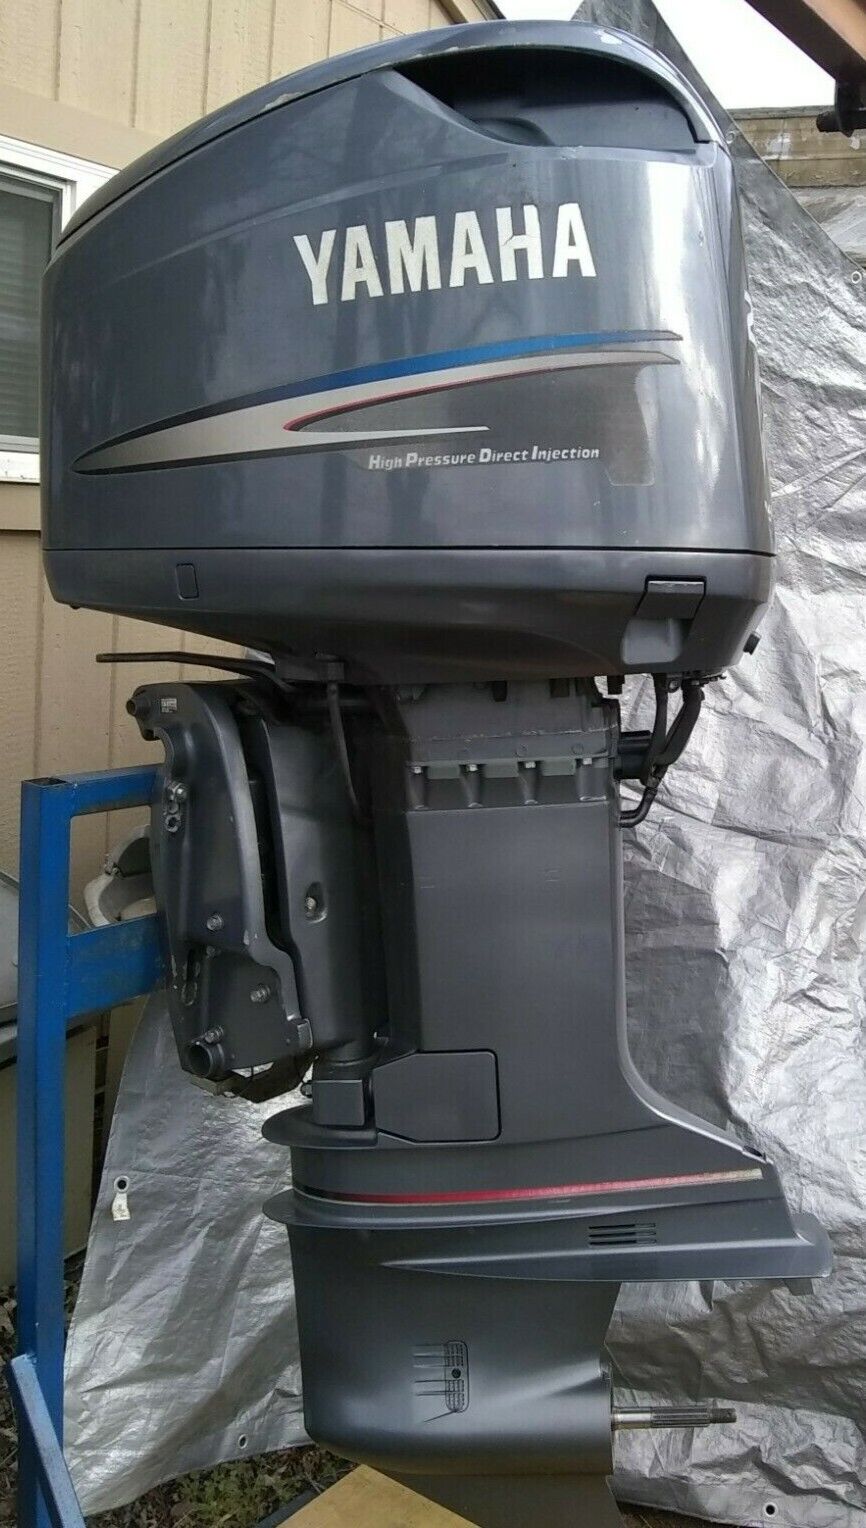 Ultra-Cheap Deals 2005 YAMAHA  Z250TXRD HPDI 250HP OR OUTBOARD FOR Limited time cheap sale PARTS REBUILD